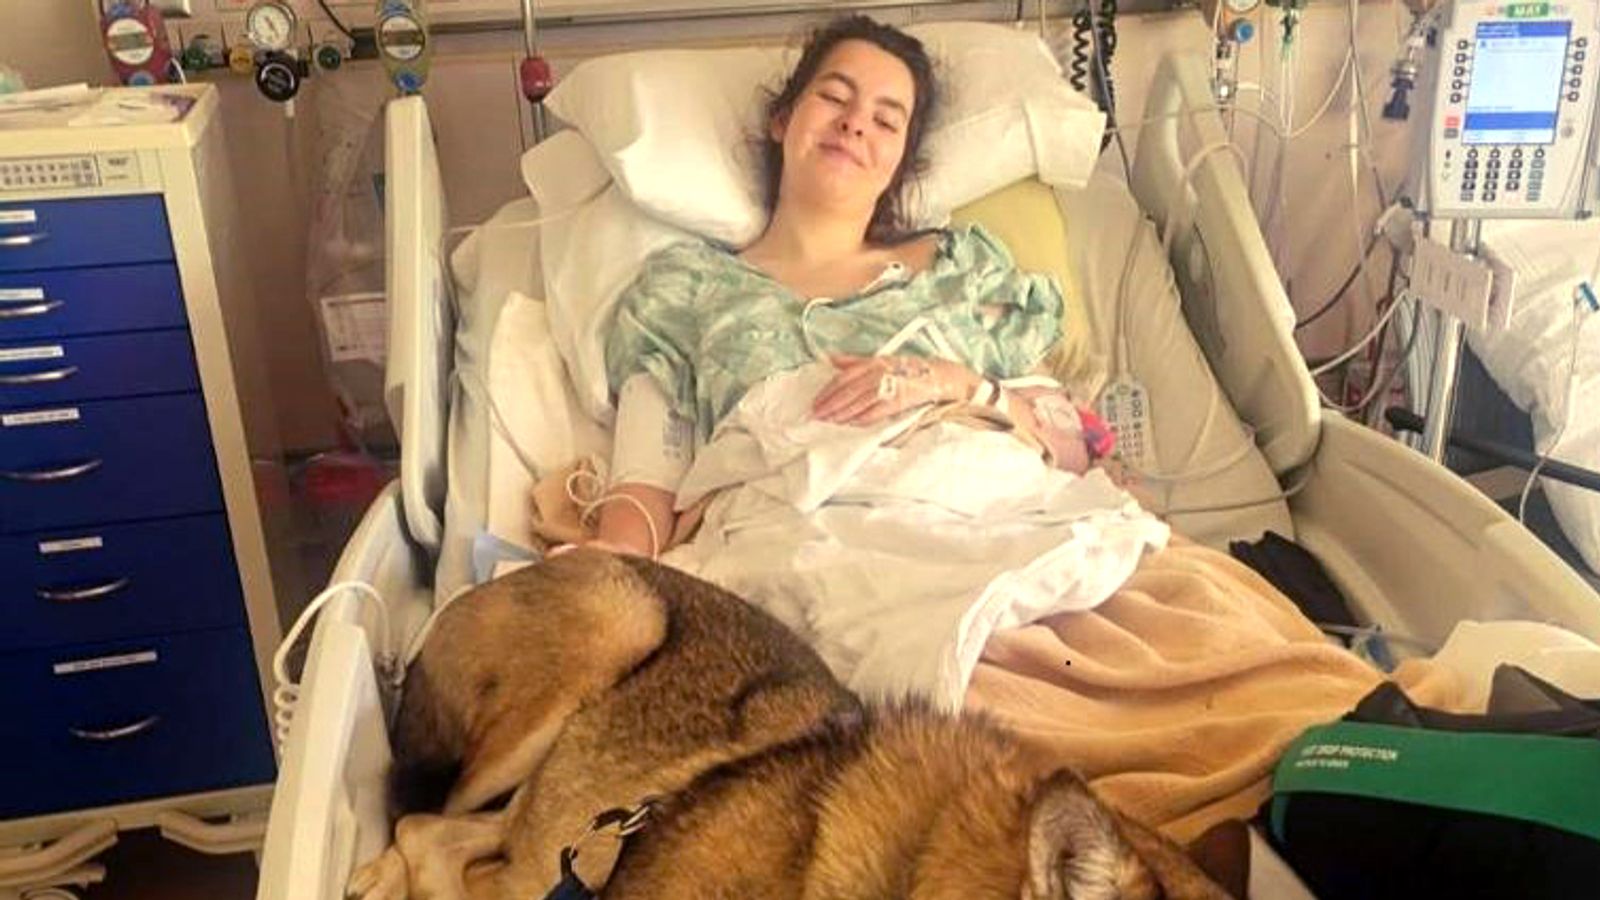 British student unable to walk after bison attack may be left stranded in US over health insurance, parents say